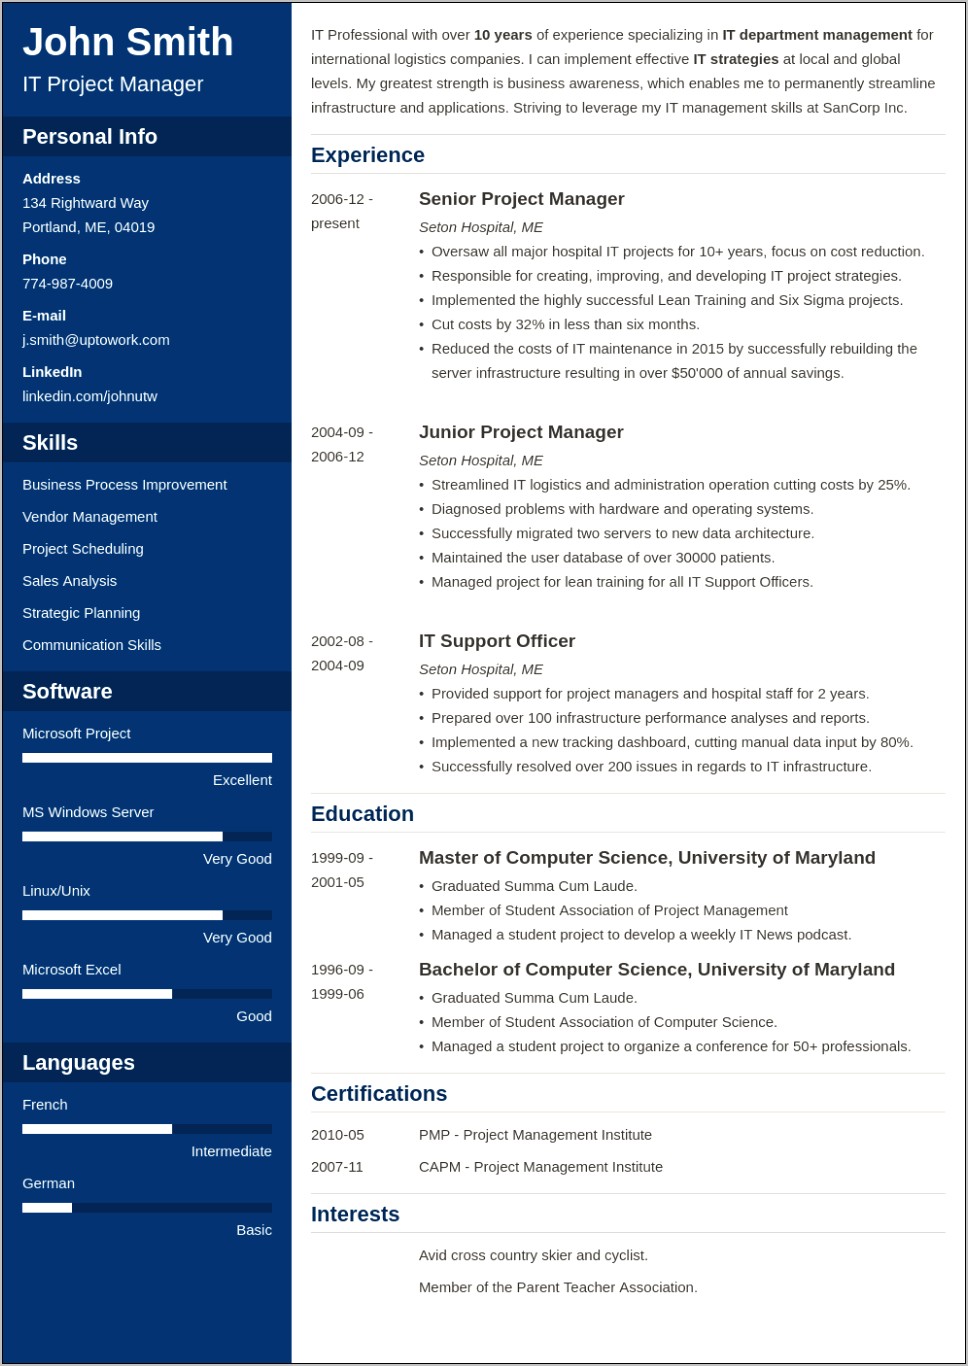 Resume Format For Experienced Candidates Free Download